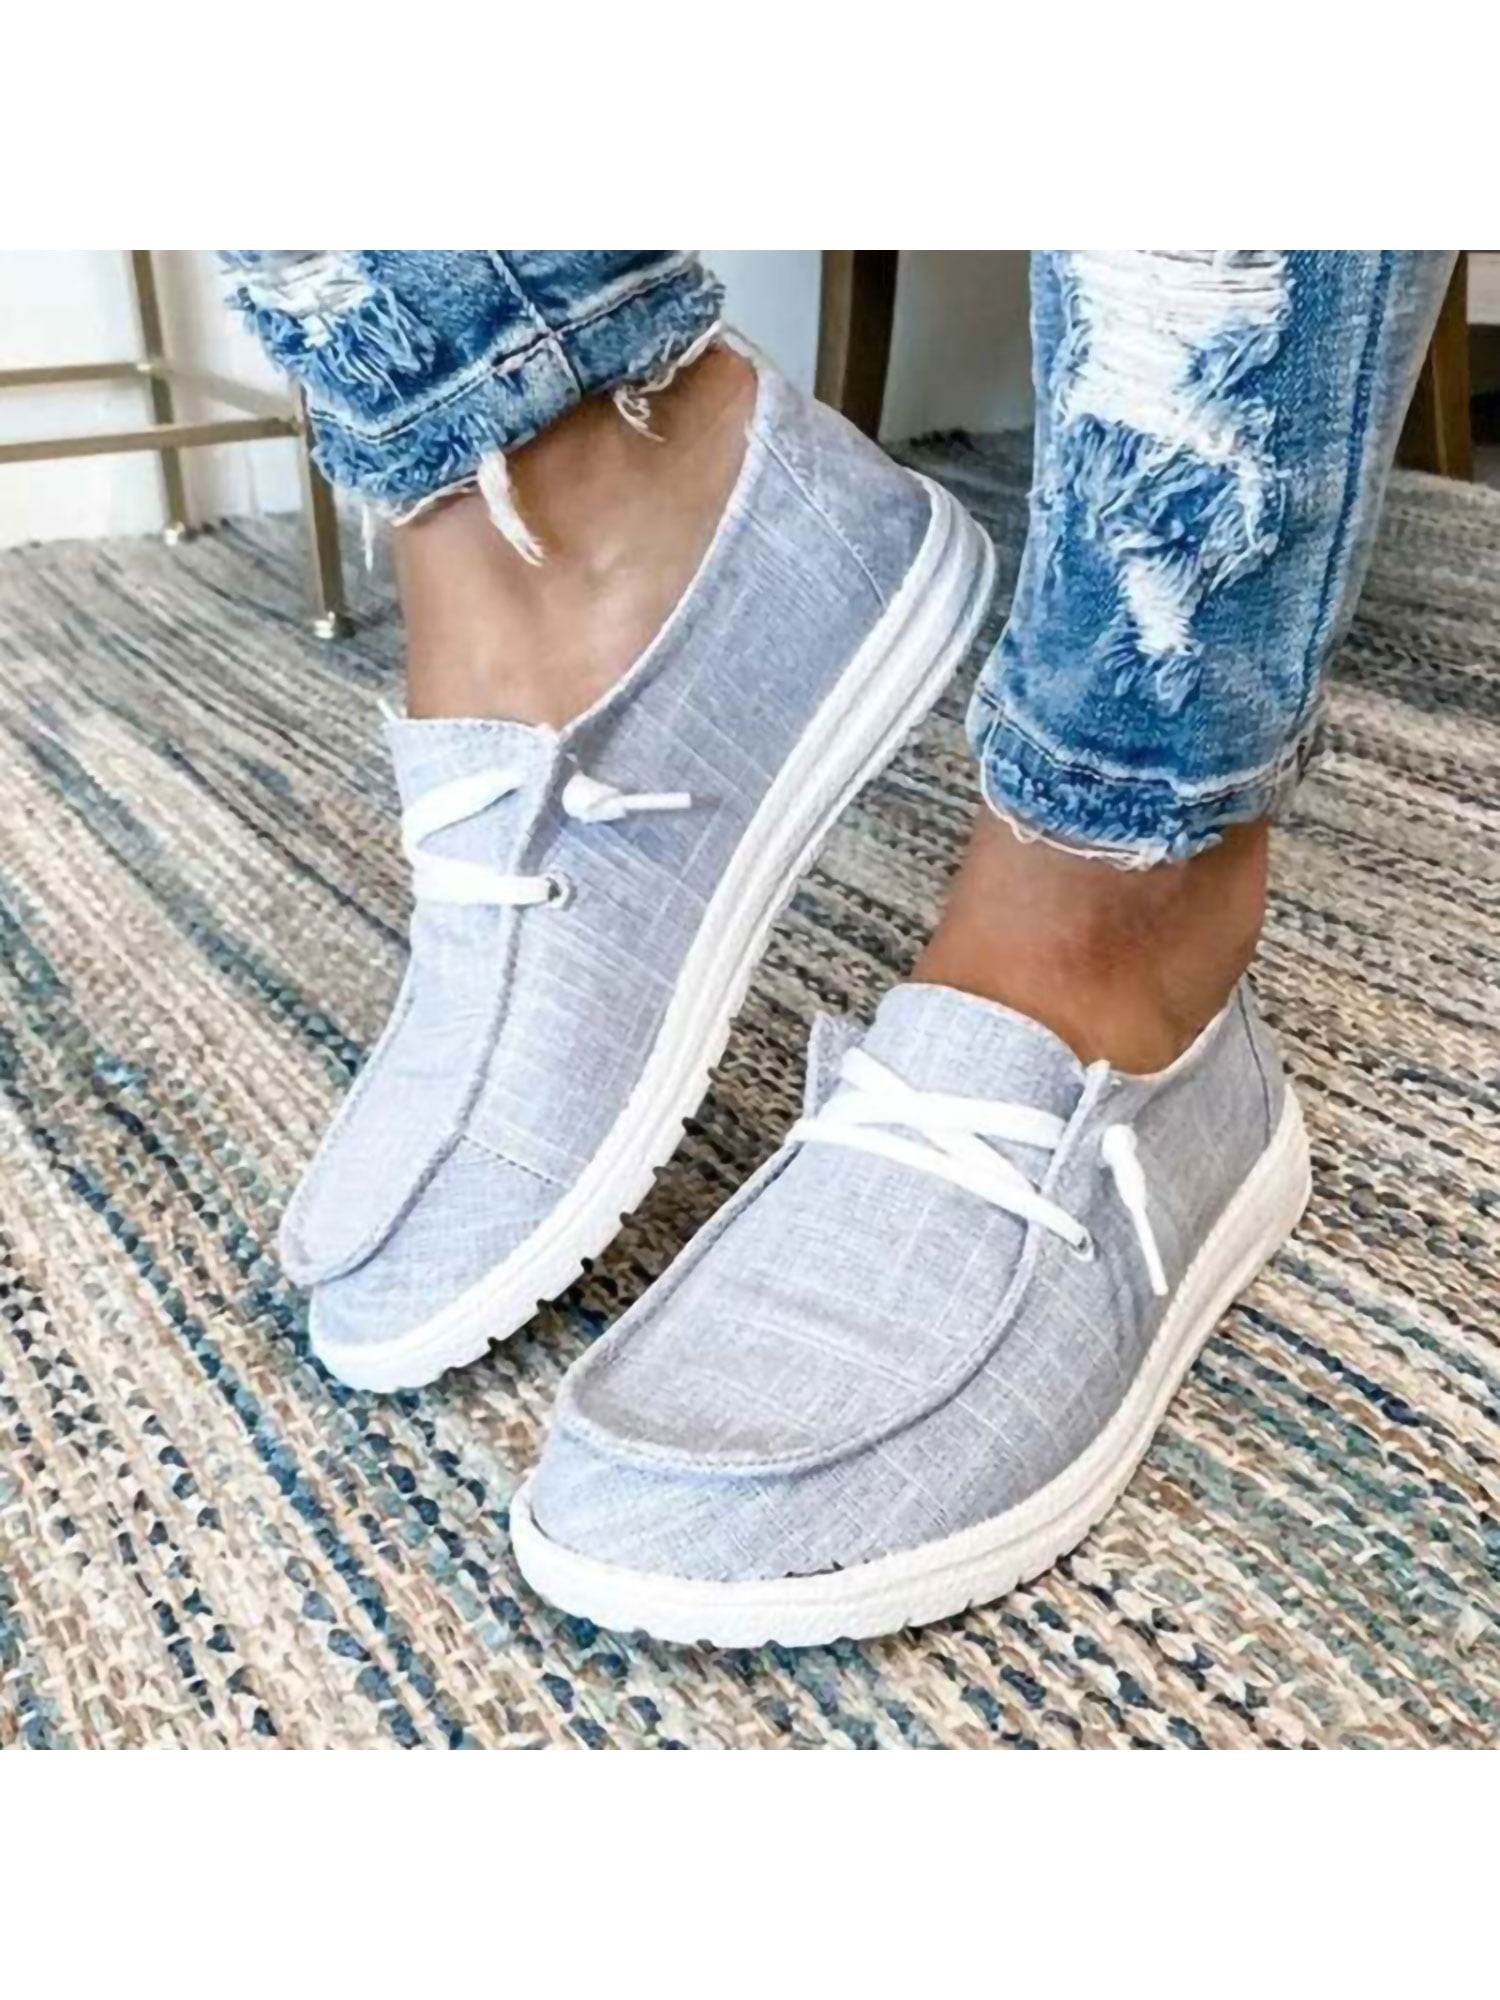 FUN.S Womens Sneaker Casual Fashion Loafer Slip-on Espadrille Flat Canvas Shoes